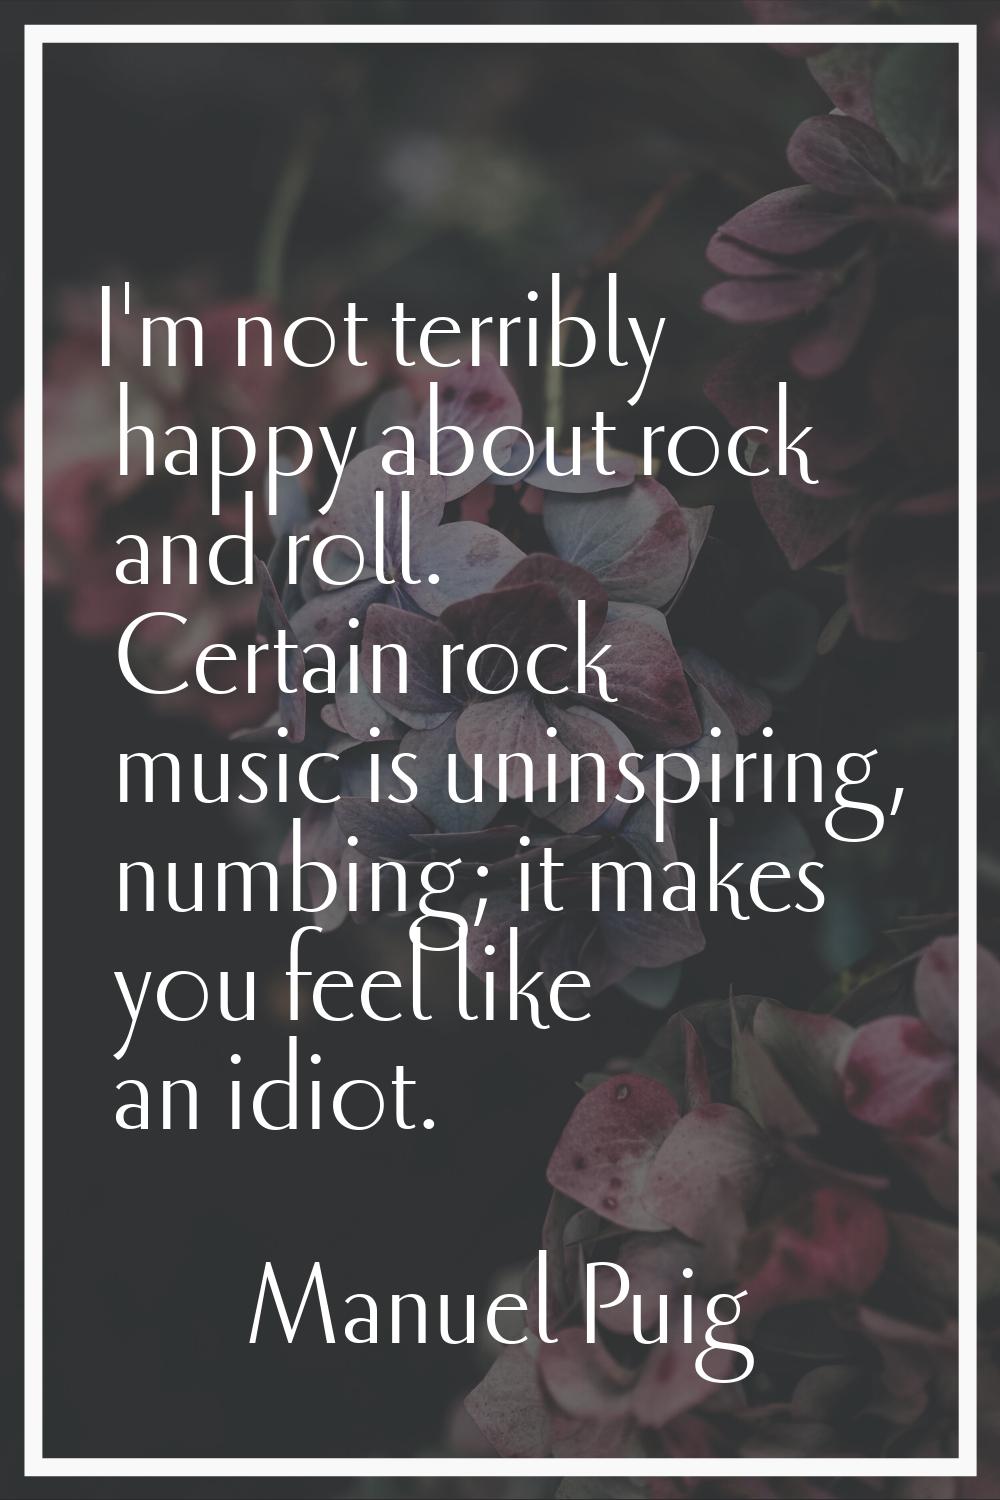 I'm not terribly happy about rock and roll. Certain rock music is uninspiring, numbing; it makes yo